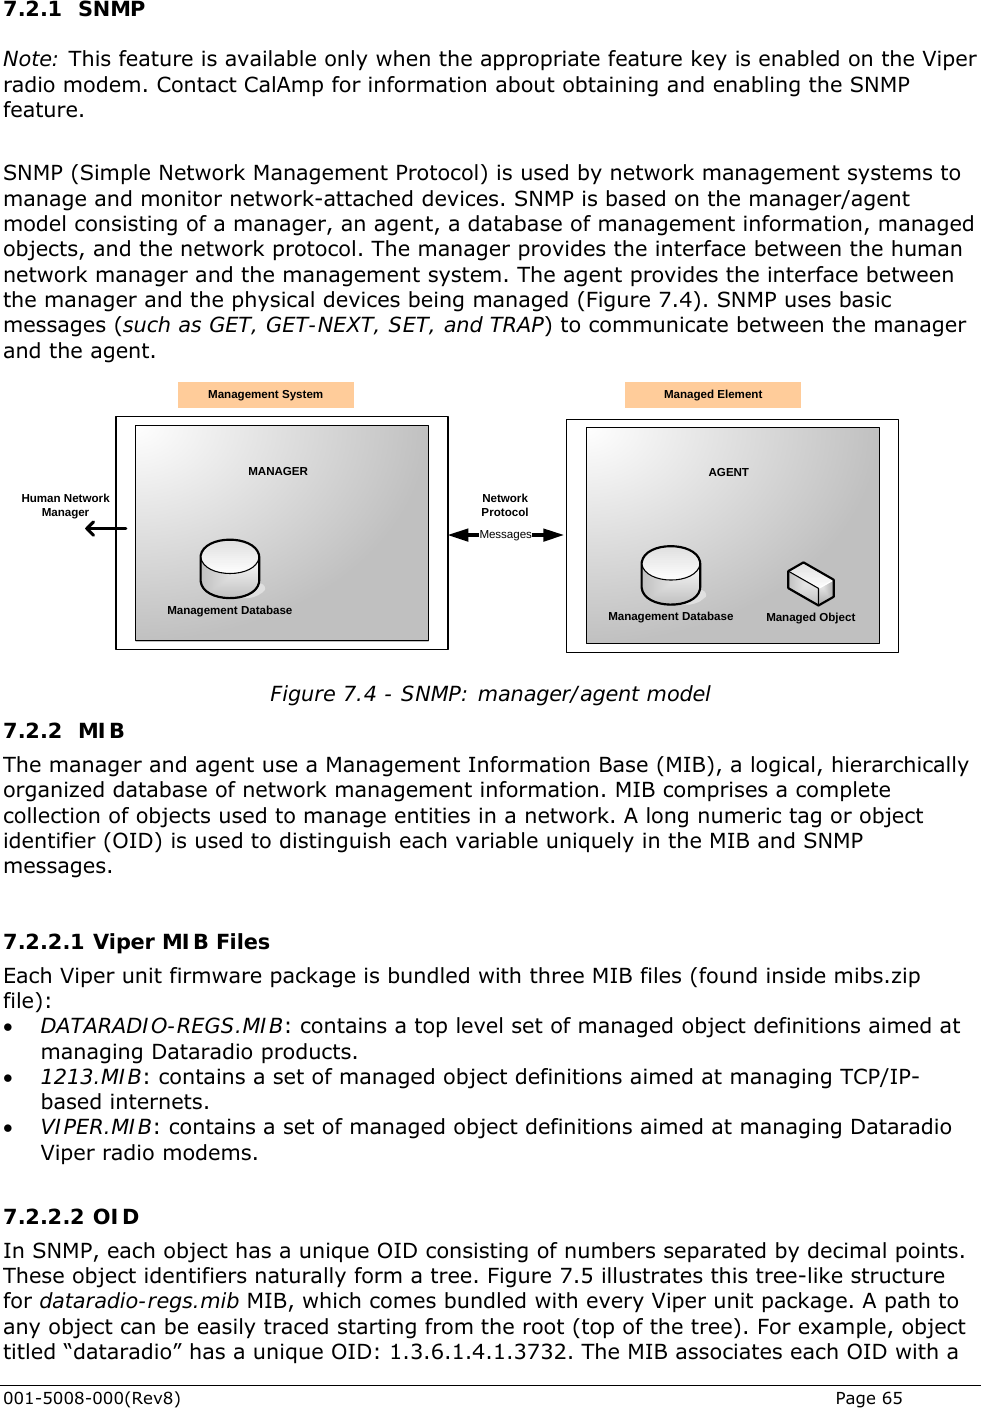   7.2.1 SNMP  Note: This feature is available only when the appropriate feature key is enabled on the Viper radio modem. Contact CalAmp for information about obtaining and enabling the SNMP feature.  SNMP (Simple Network Management Protocol) is used by network management systems to manage and monitor network-attached devices. SNMP is based on the manager/agent model consisting of a manager, an agent, a database of management information, managed objects, and the network protocol. The manager provides the interface between the human network manager and the management system. The agent provides the interface between the manager and the physical devices being managed (Figure 7.4). SNMP uses basic messages (such as GET, GET-NEXT, SET, and TRAP) to communicate between the manager and the agent. MANAGER AGENTManagement Database Management Database Managed ObjectMessagesNetwork ProtocolManagement System Managed ElementHuman Network Manager Figure 7.4 - SNMP: manager/agent model  7.2.2 MIB  The manager and agent use a Management Information Base (MIB), a logical, hierarchically organized database of network management information. MIB comprises a complete collection of objects used to manage entities in a network. A long numeric tag or object identifier (OID) is used to distinguish each variable uniquely in the MIB and SNMP messages.  7.2.2.1 Viper MIB Files Each Viper unit firmware package is bundled with three MIB files (found inside mibs.zip file): • DATARADIO-REGS.MIB: contains a top level set of managed object definitions aimed at managing Dataradio products. • 1213.MIB: contains a set of managed object definitions aimed at managing TCP/IP-based internets. • VIPER.MIB: contains a set of managed object definitions aimed at managing Dataradio Viper radio modems.  7.2.2.2 OID In SNMP, each object has a unique OID consisting of numbers separated by decimal points. These object identifiers naturally form a tree. Figure 7.5 illustrates this tree-like structure for dataradio-regs.mib MIB, which comes bundled with every Viper unit package. A path to any object can be easily traced starting from the root (top of the tree). For example, object titled “dataradio” has a unique OID: 1.3.6.1.4.1.3732. The MIB associates each OID with a 001-5008-000(Rev8)   Page 65 